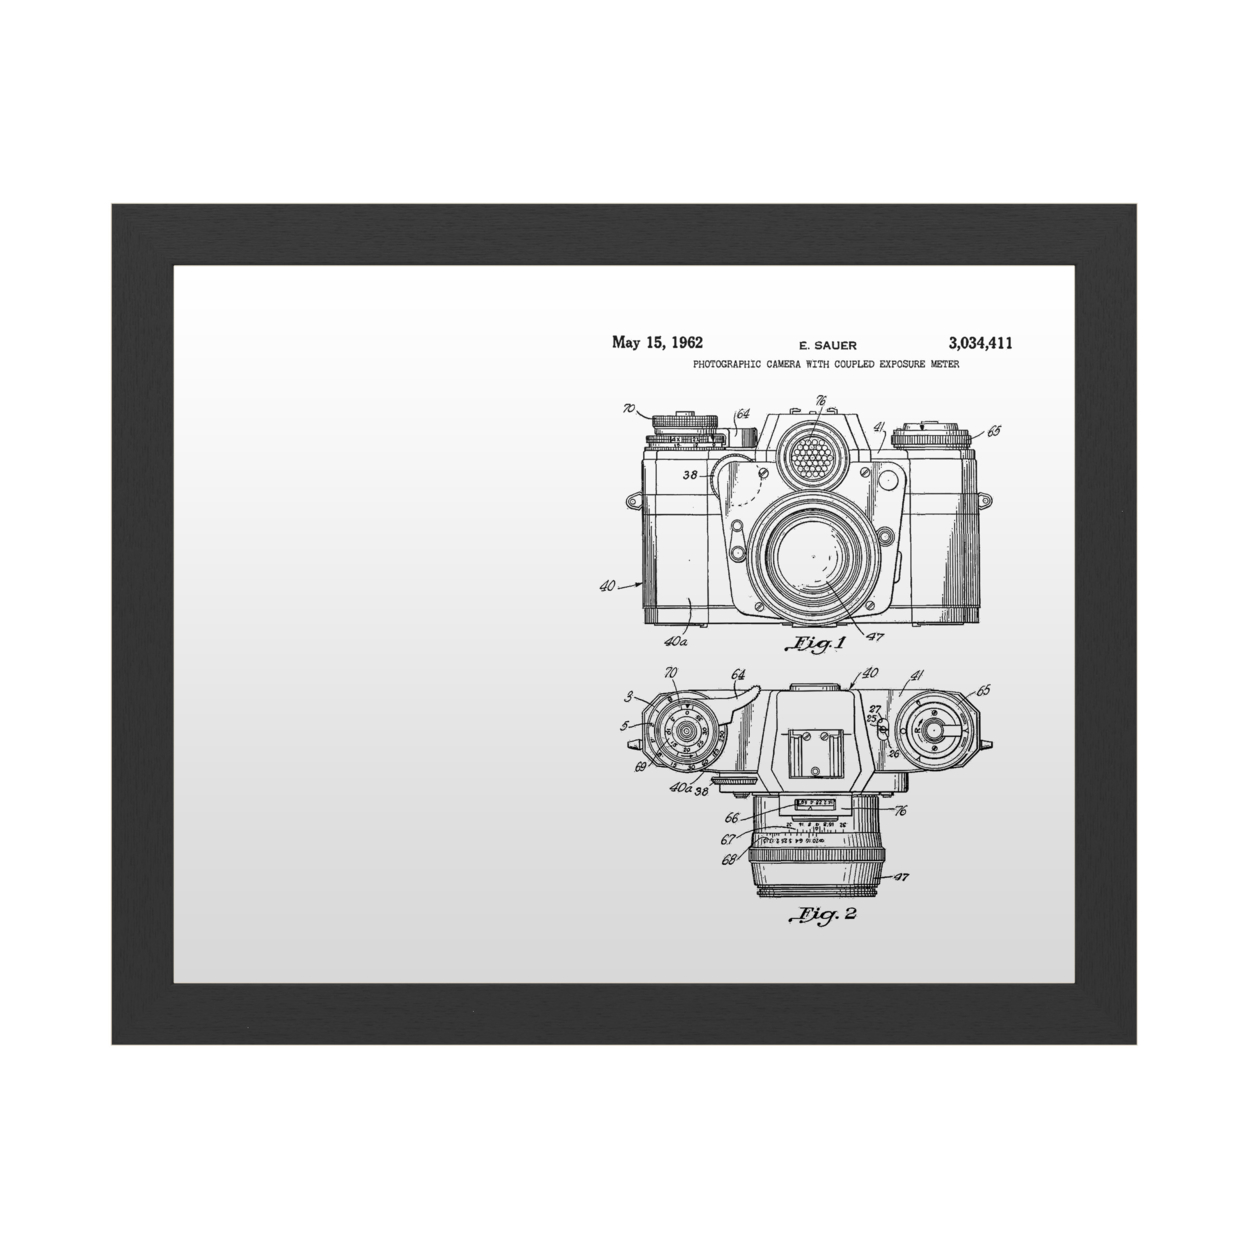 Dry Erase 16 X 20 Marker Board With Printed Artwork - Claire Doherty Photographic Camera Patent 1962 White Board - Ready To Hang